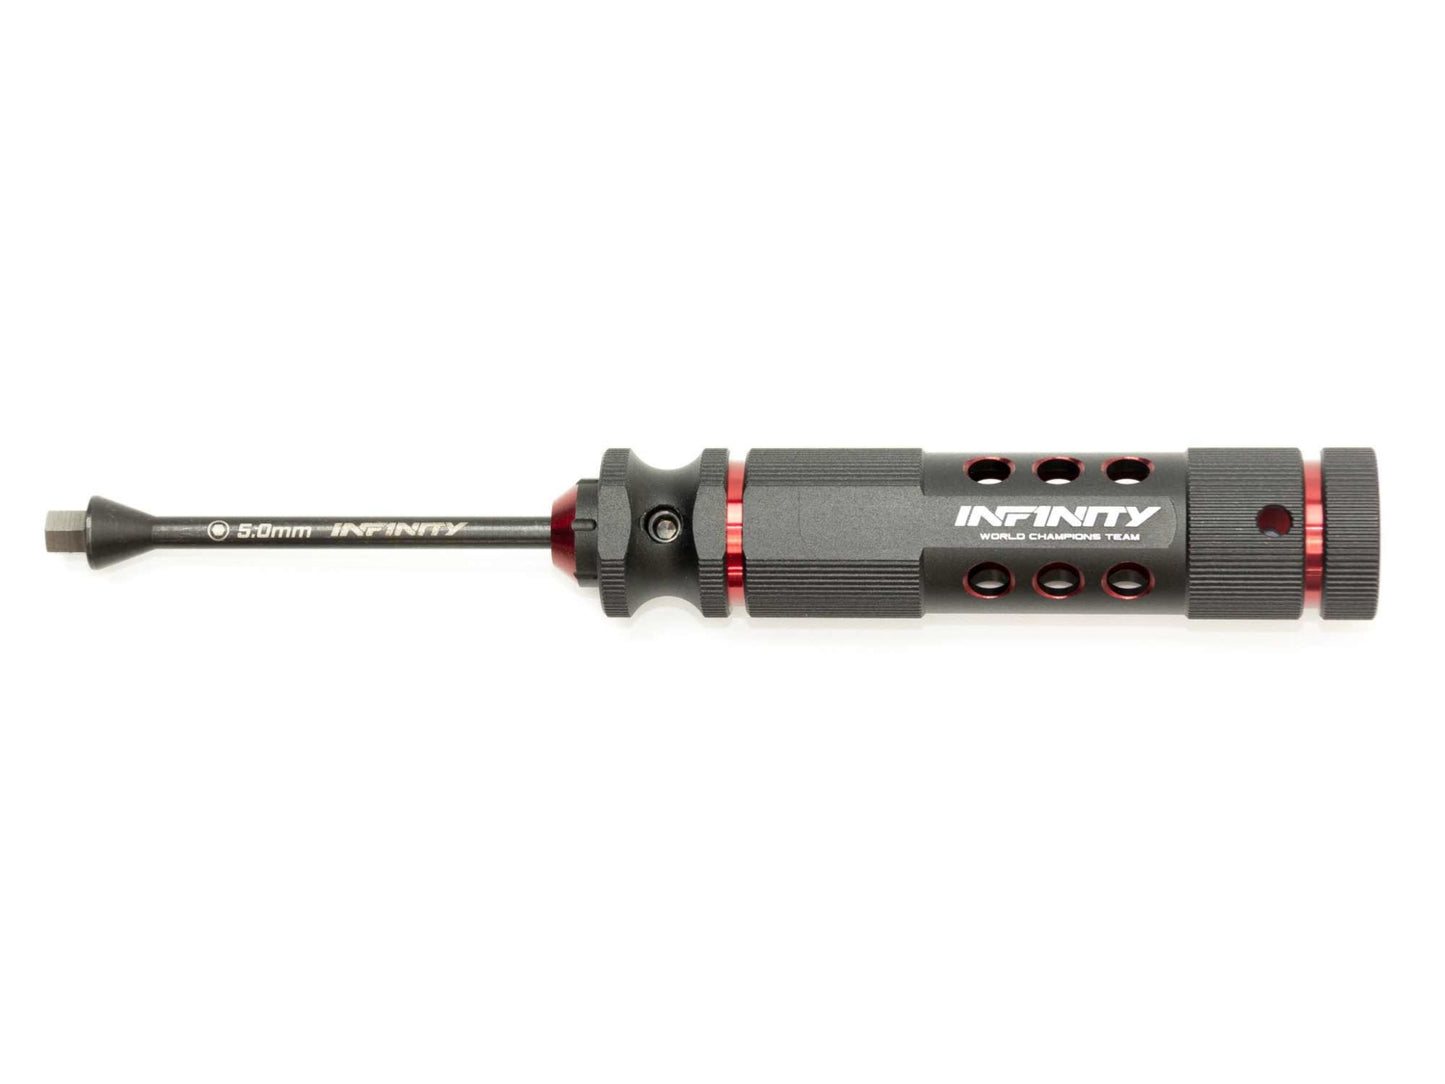 A2150 - INFINITY 5.0mm HEX WRENCH SCREWDRIVER